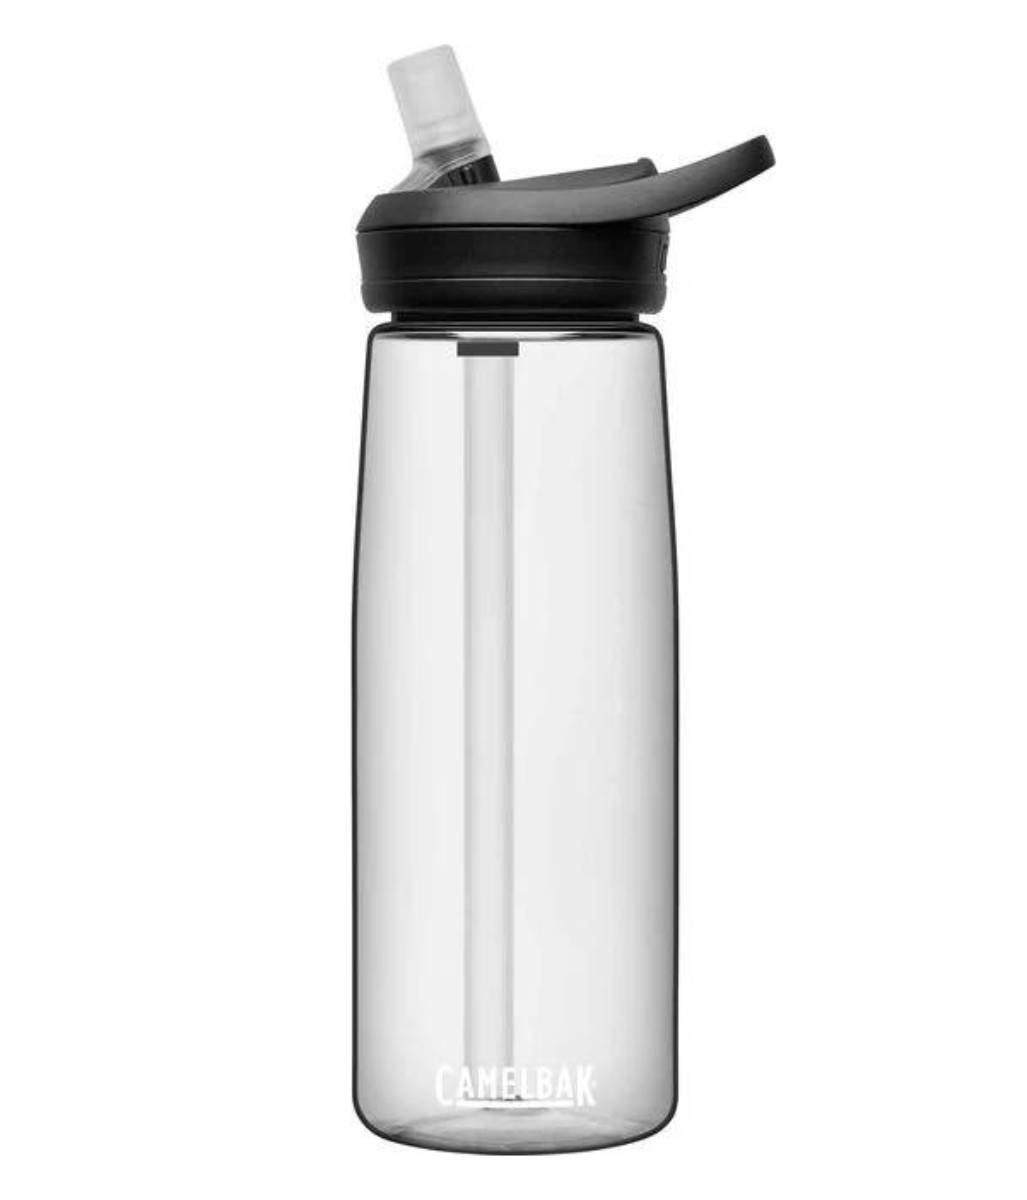 CamelBak Eddy® Panthers Water Bottle, 25oz – Mississippi Panthers